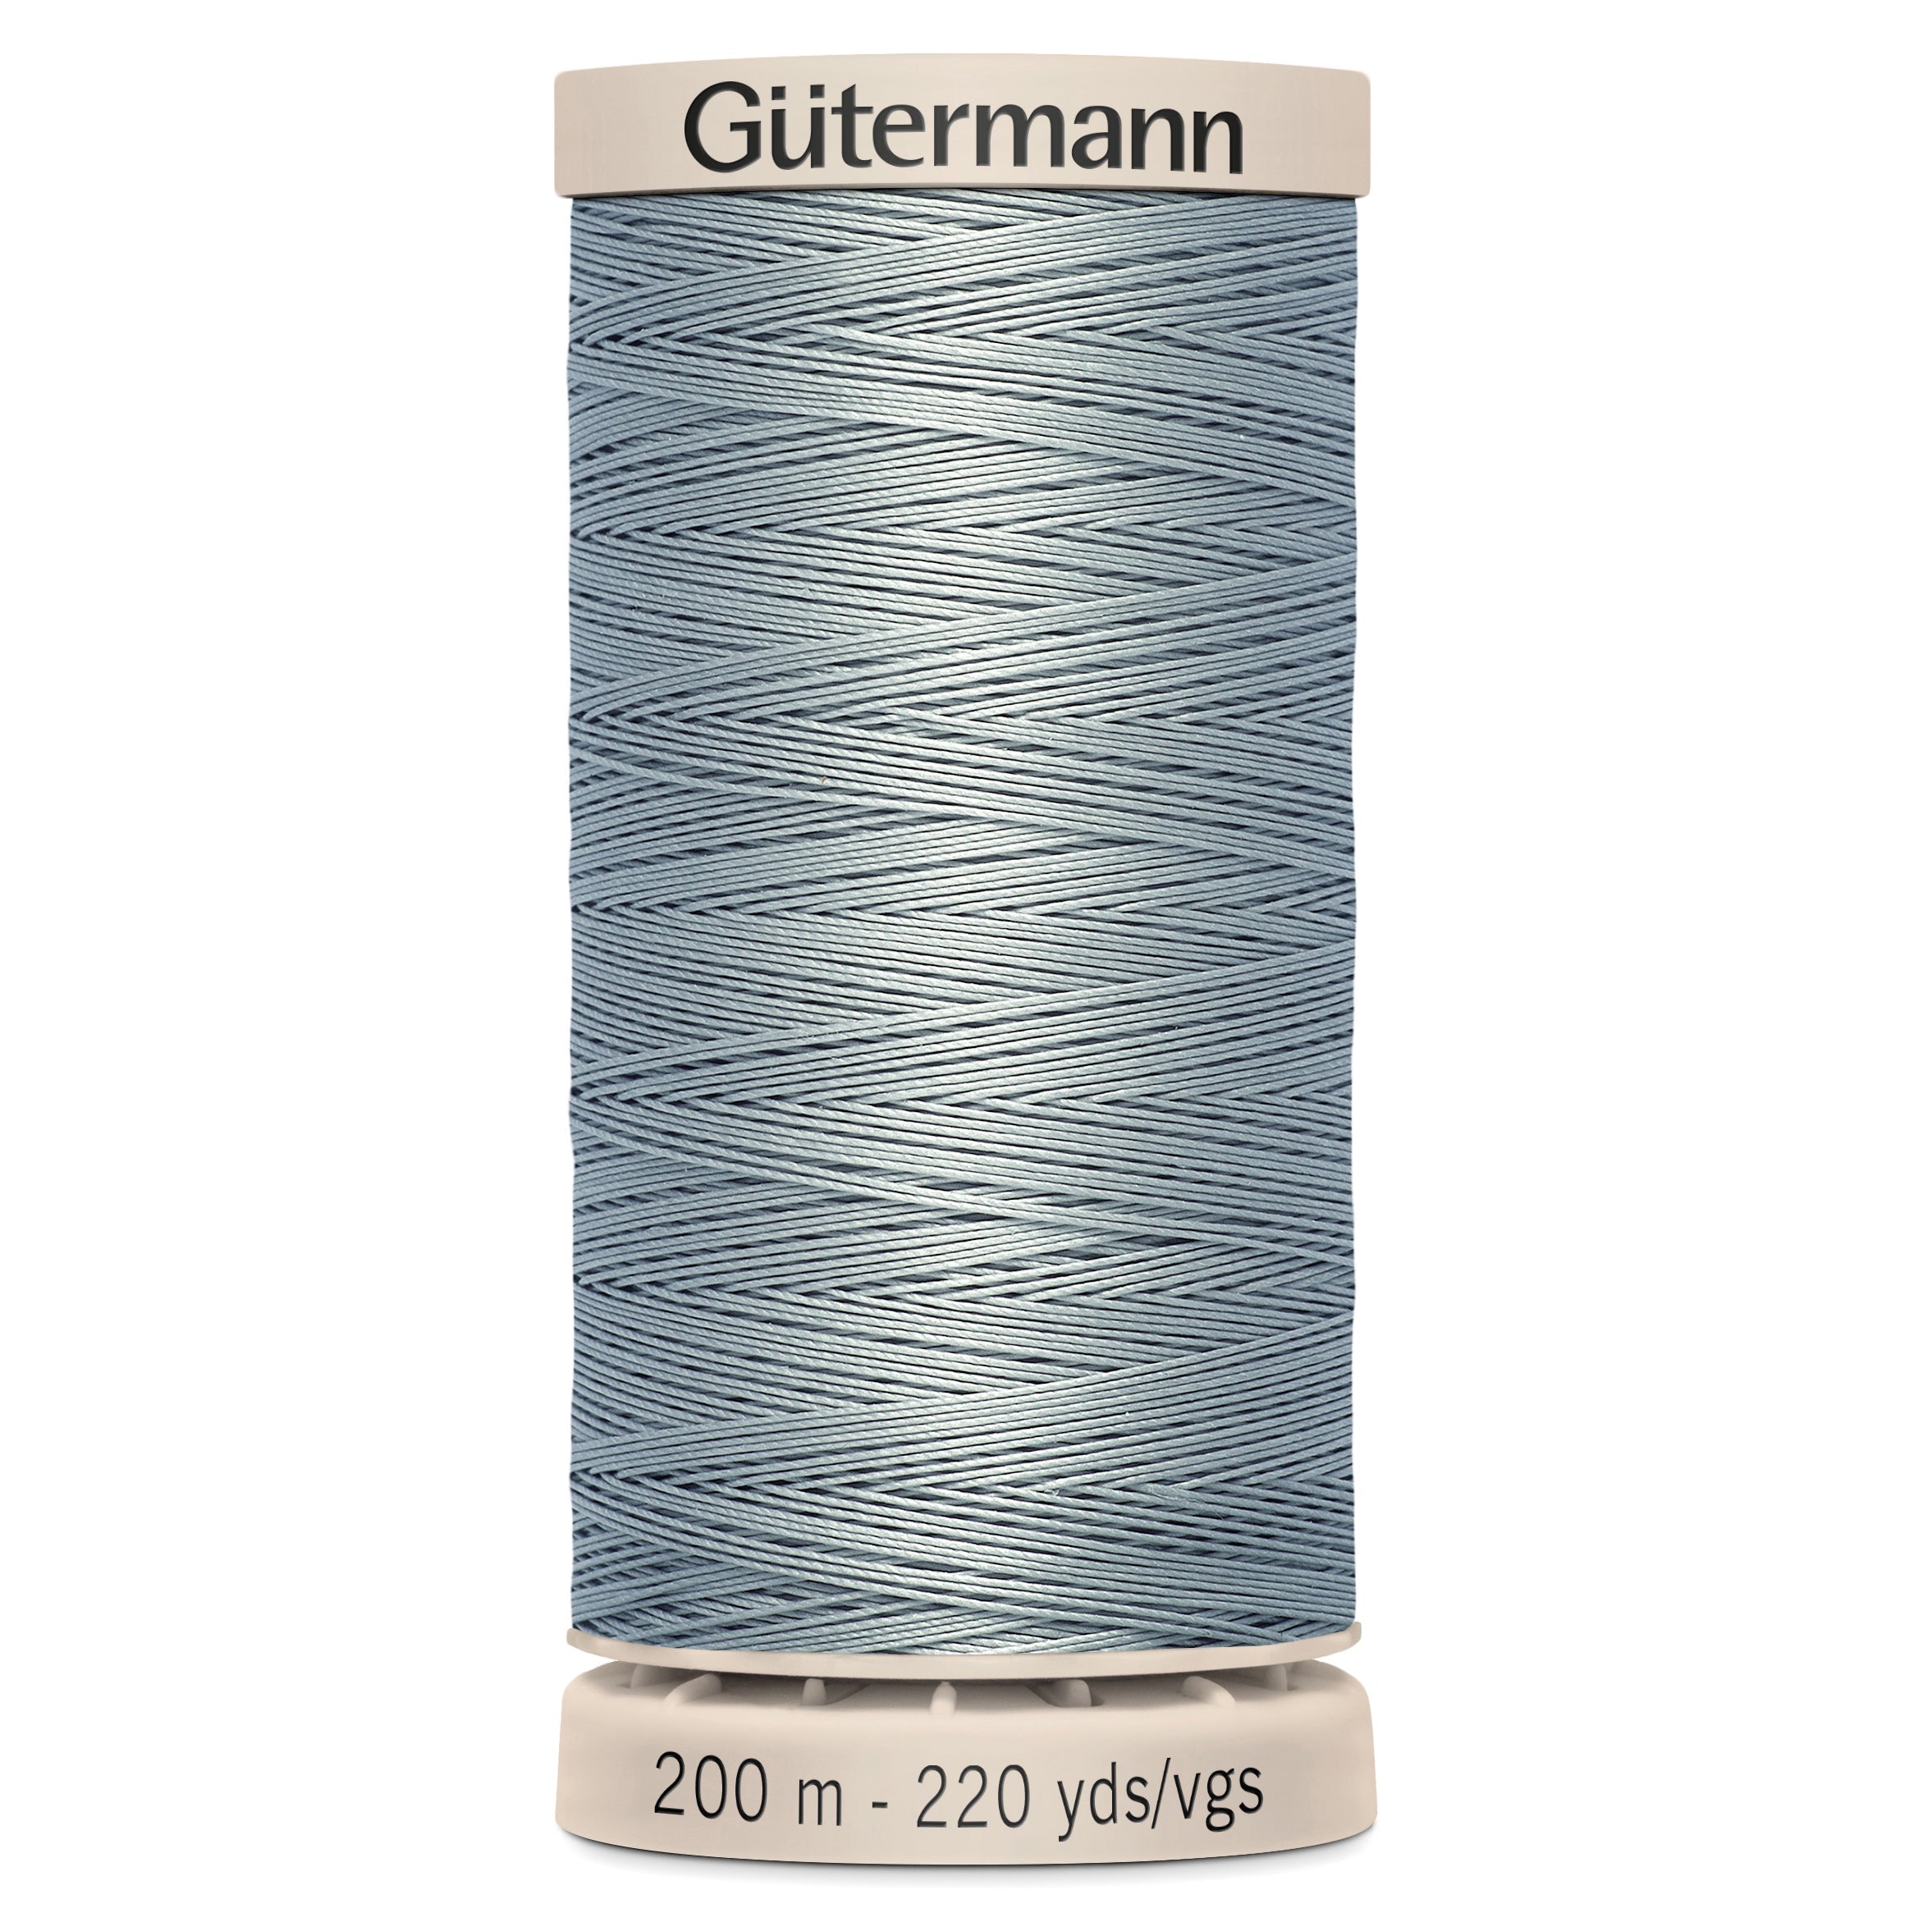 Gutermann Hand Quilting Cotton - 6506 from Jaycotts Sewing Supplies